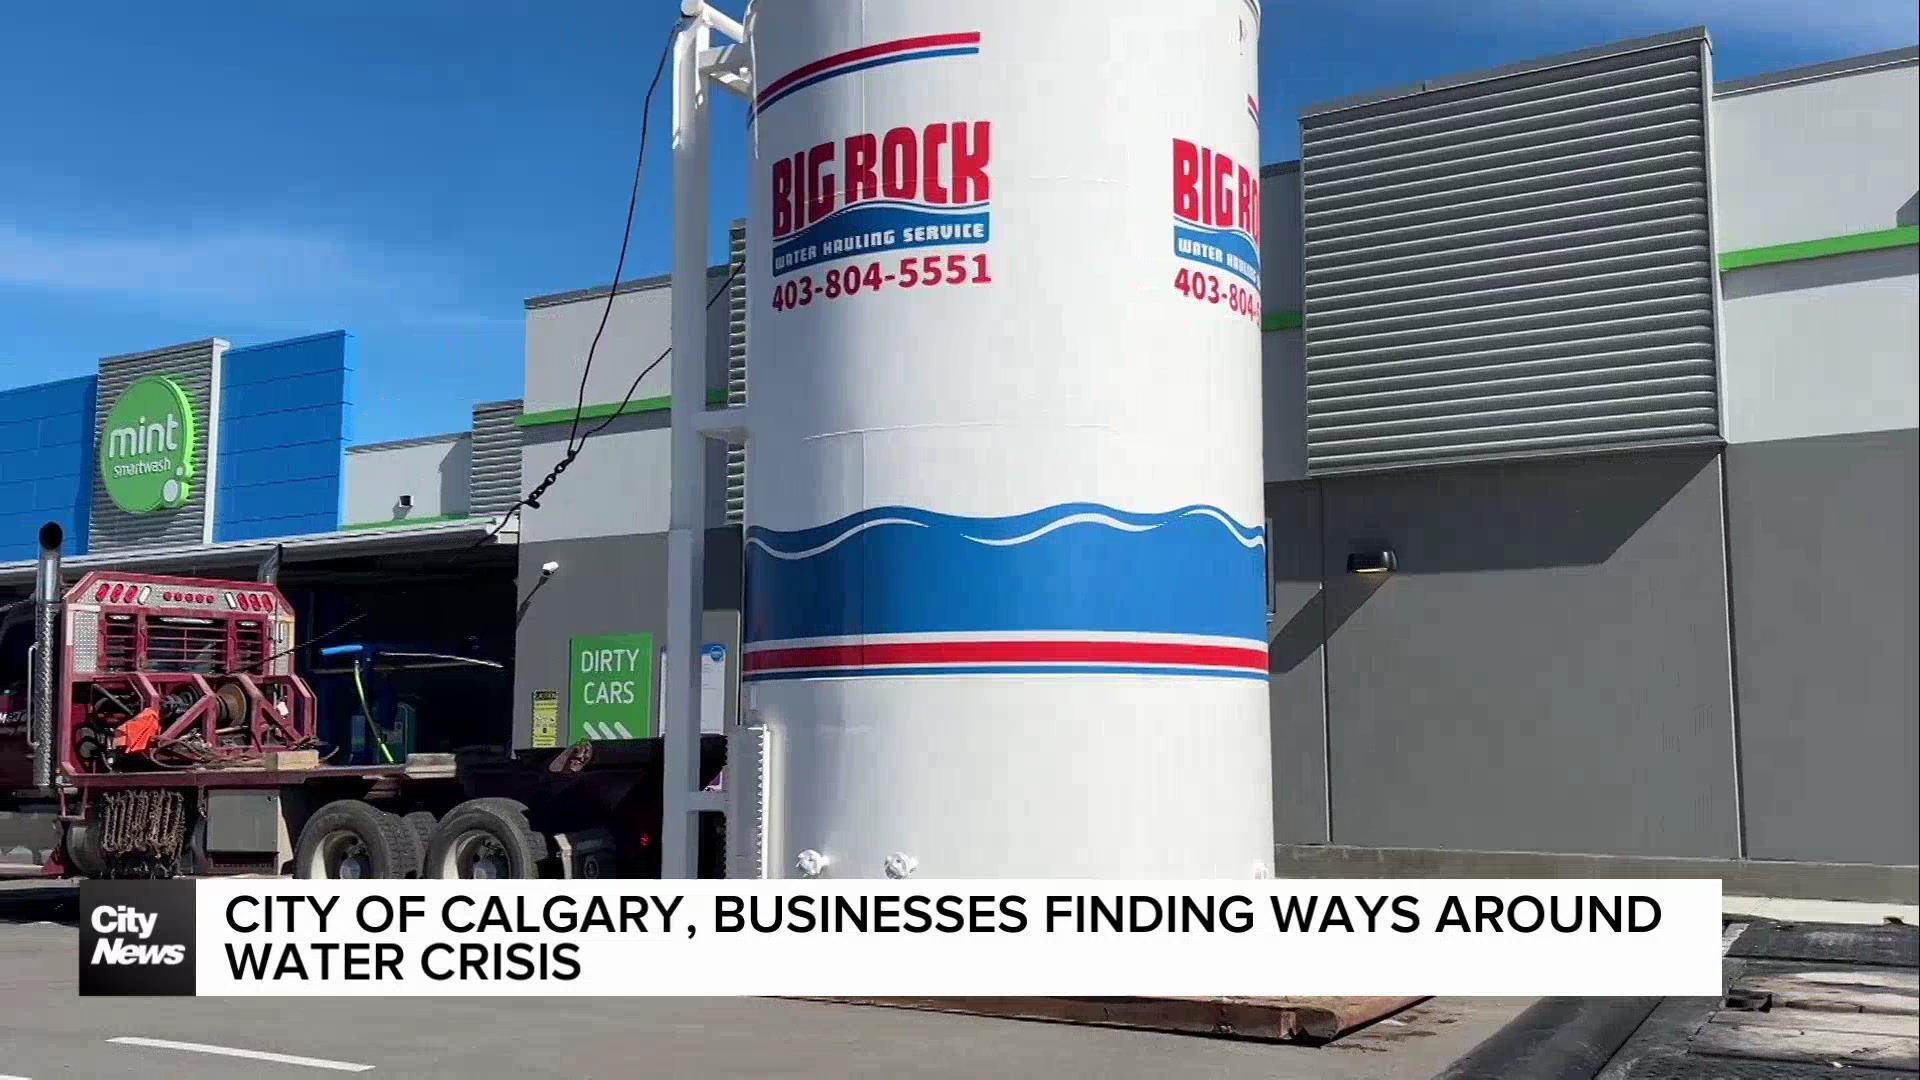 City of Calgary, businesses finding ways around water crisis